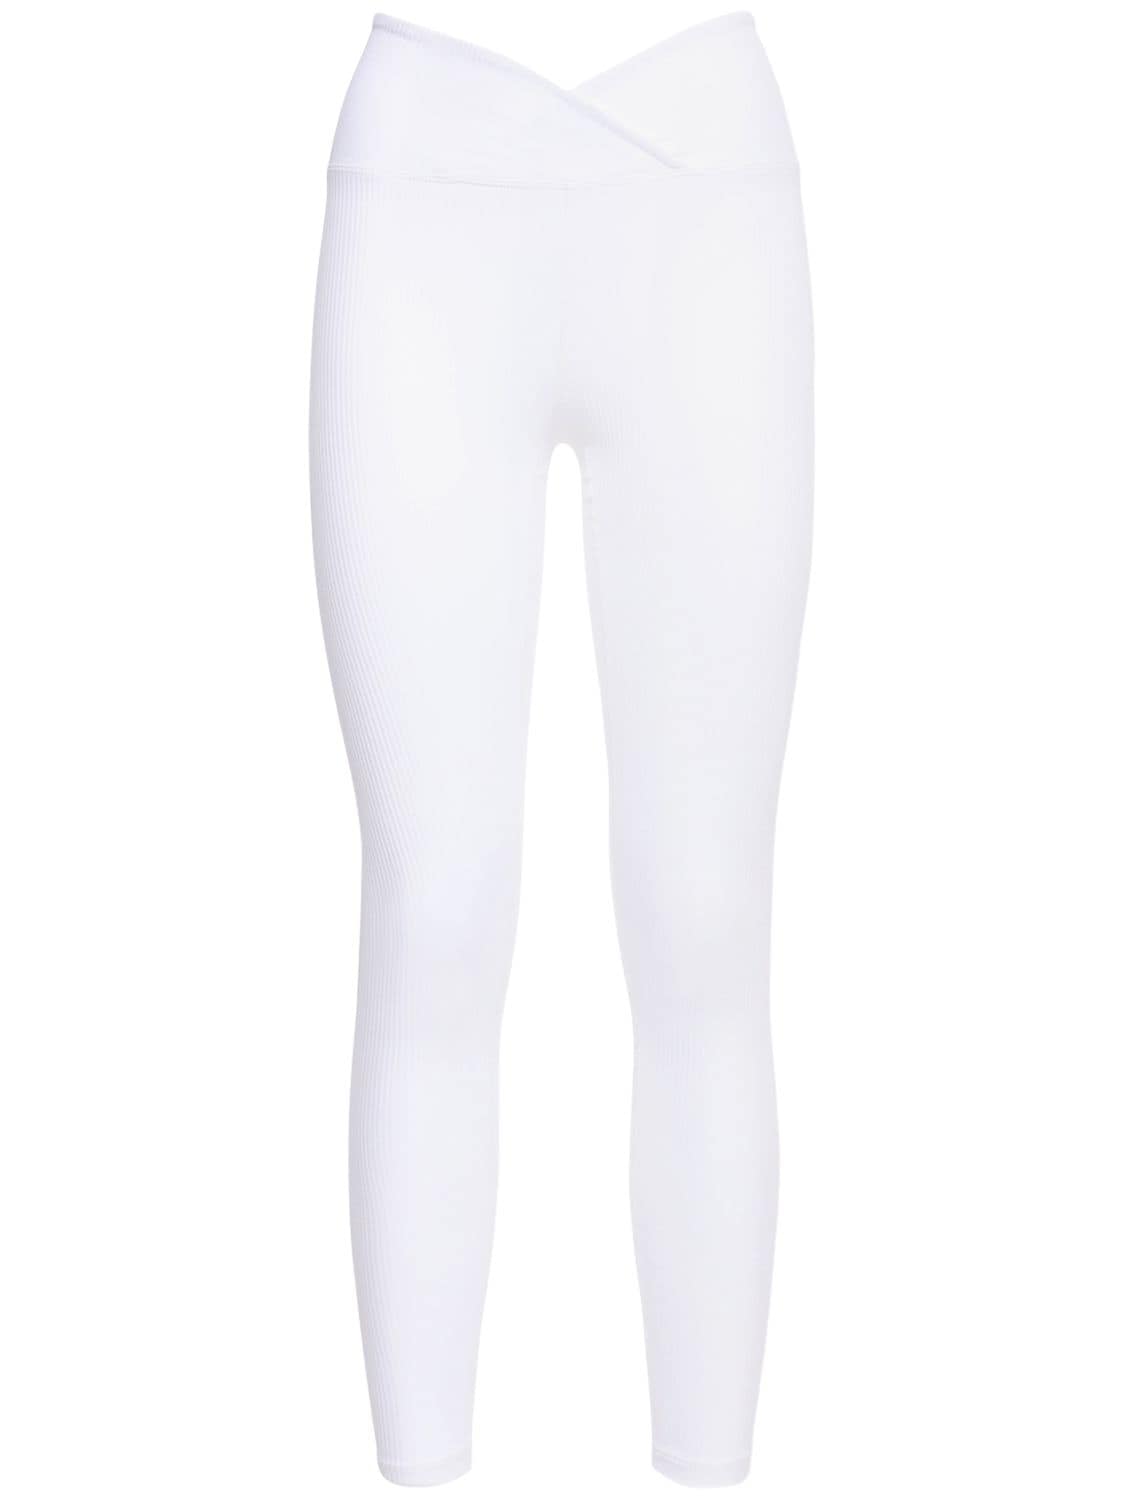 YEAR OF OURS VERONICA RIBBED LEGGINGS,72IE7D011-V1Q1